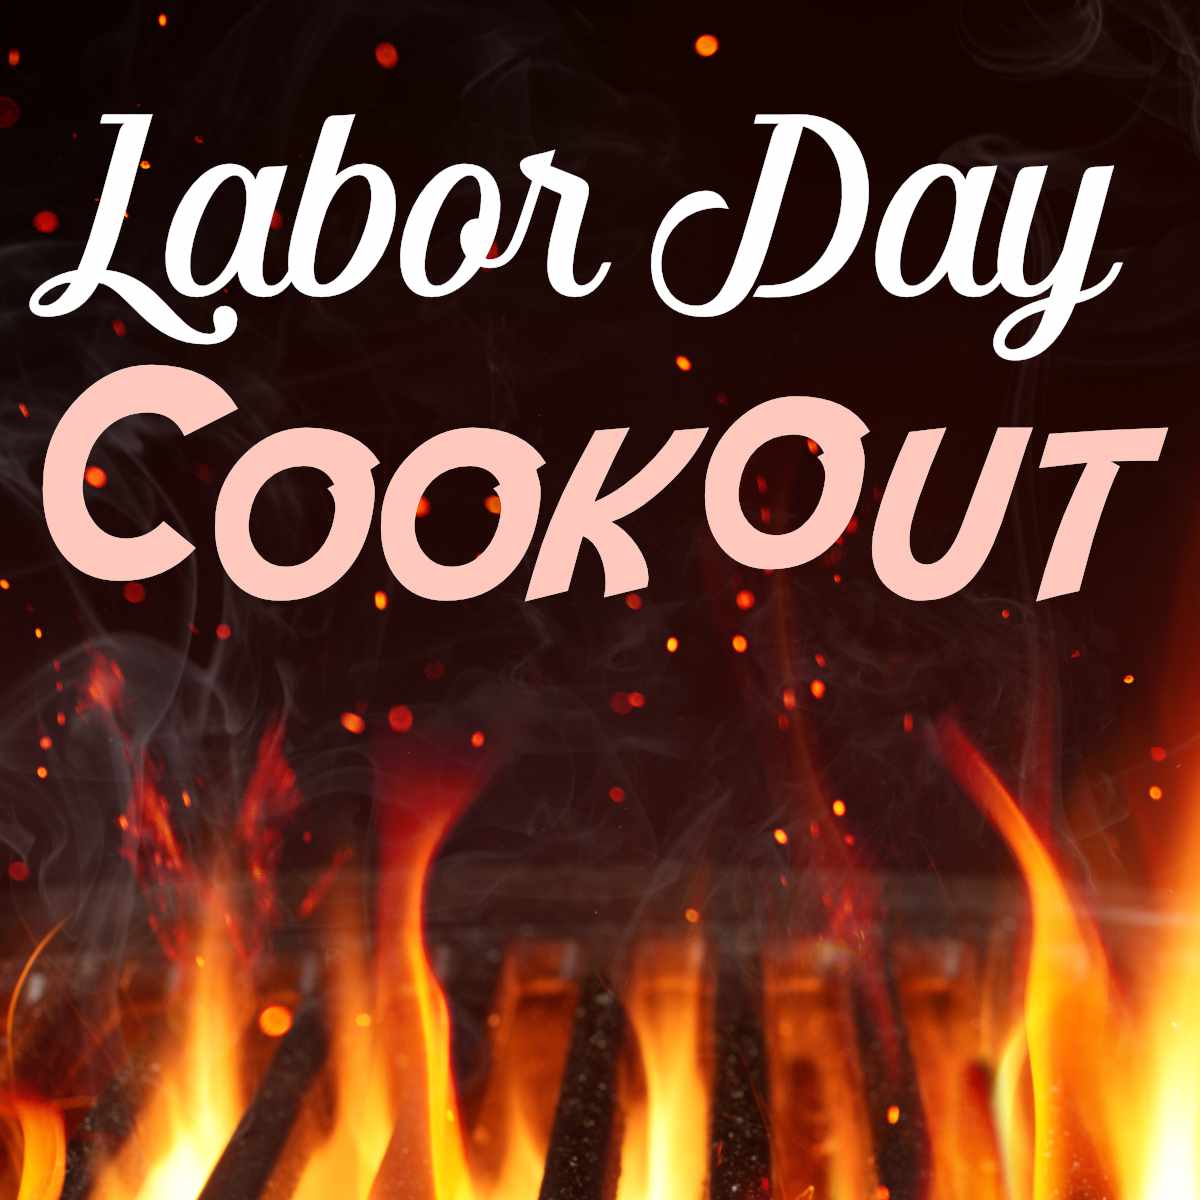 Labor Day Cookout